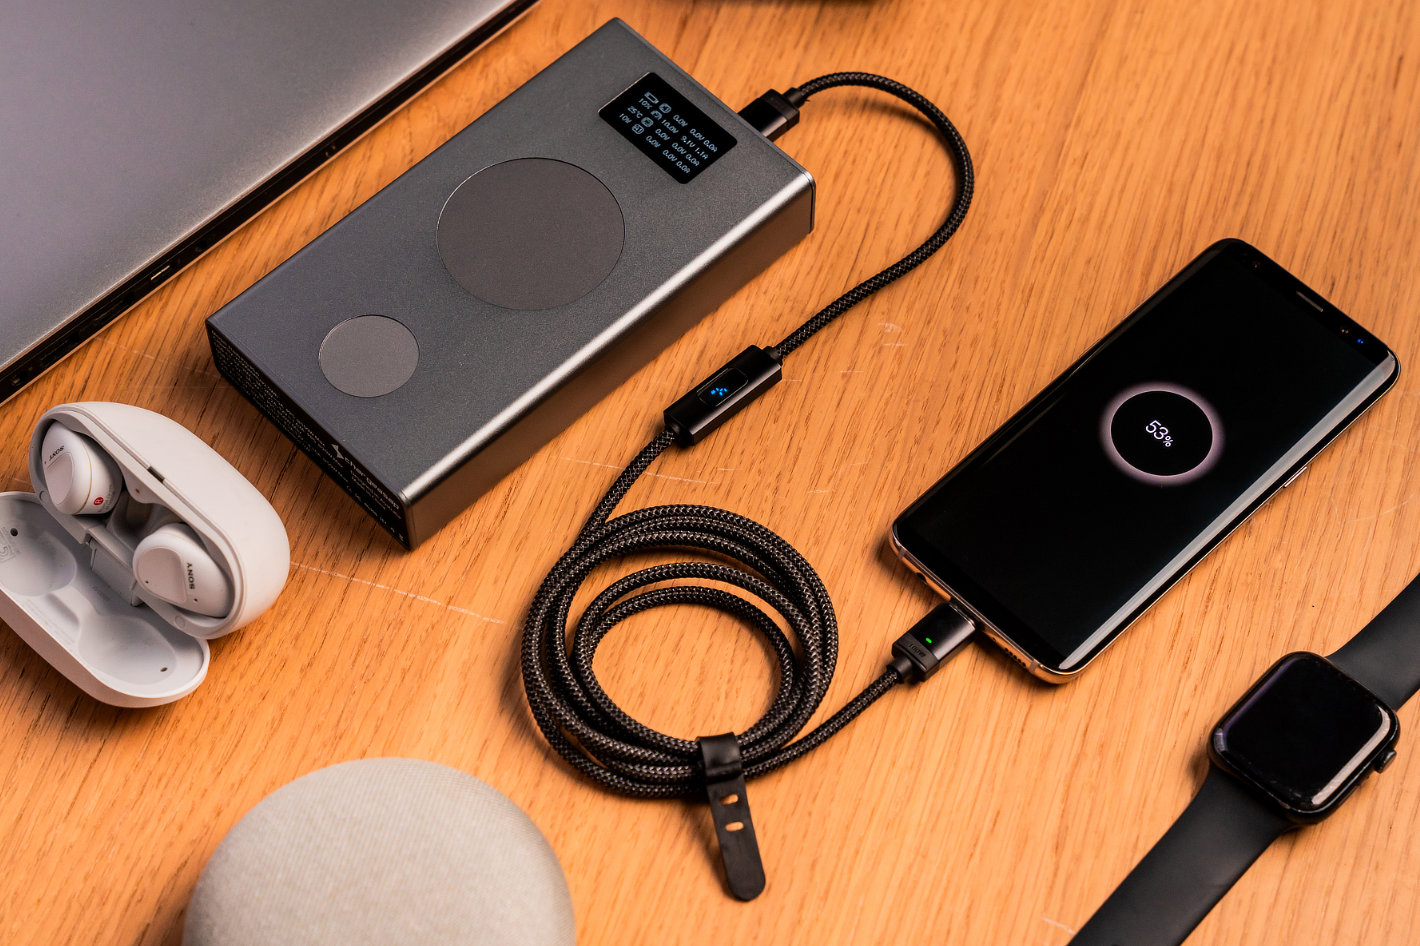  Connect Pro: one cable to charge all your devices